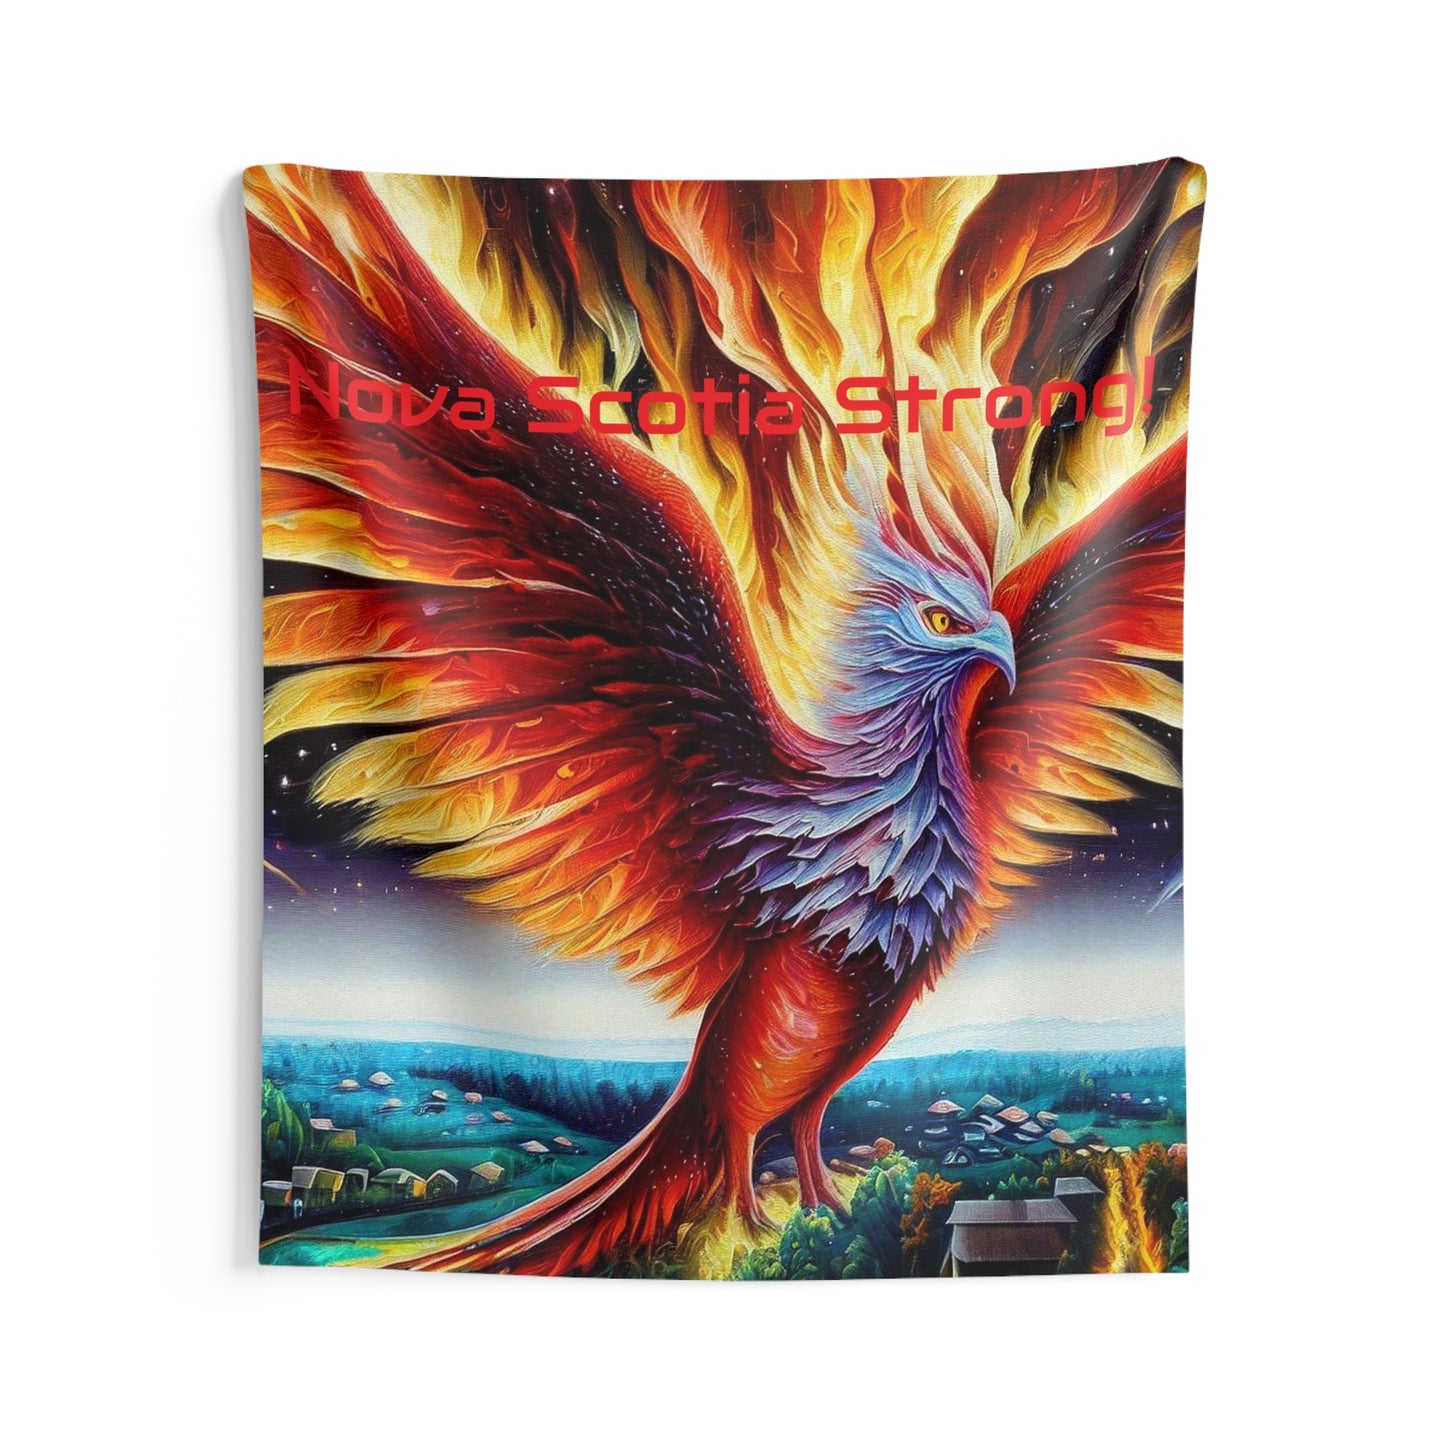 Creative Indoor Phoenix Rising Wall Art Tapestry - Nova Scotia Strong - Wall Decoration Special Edition